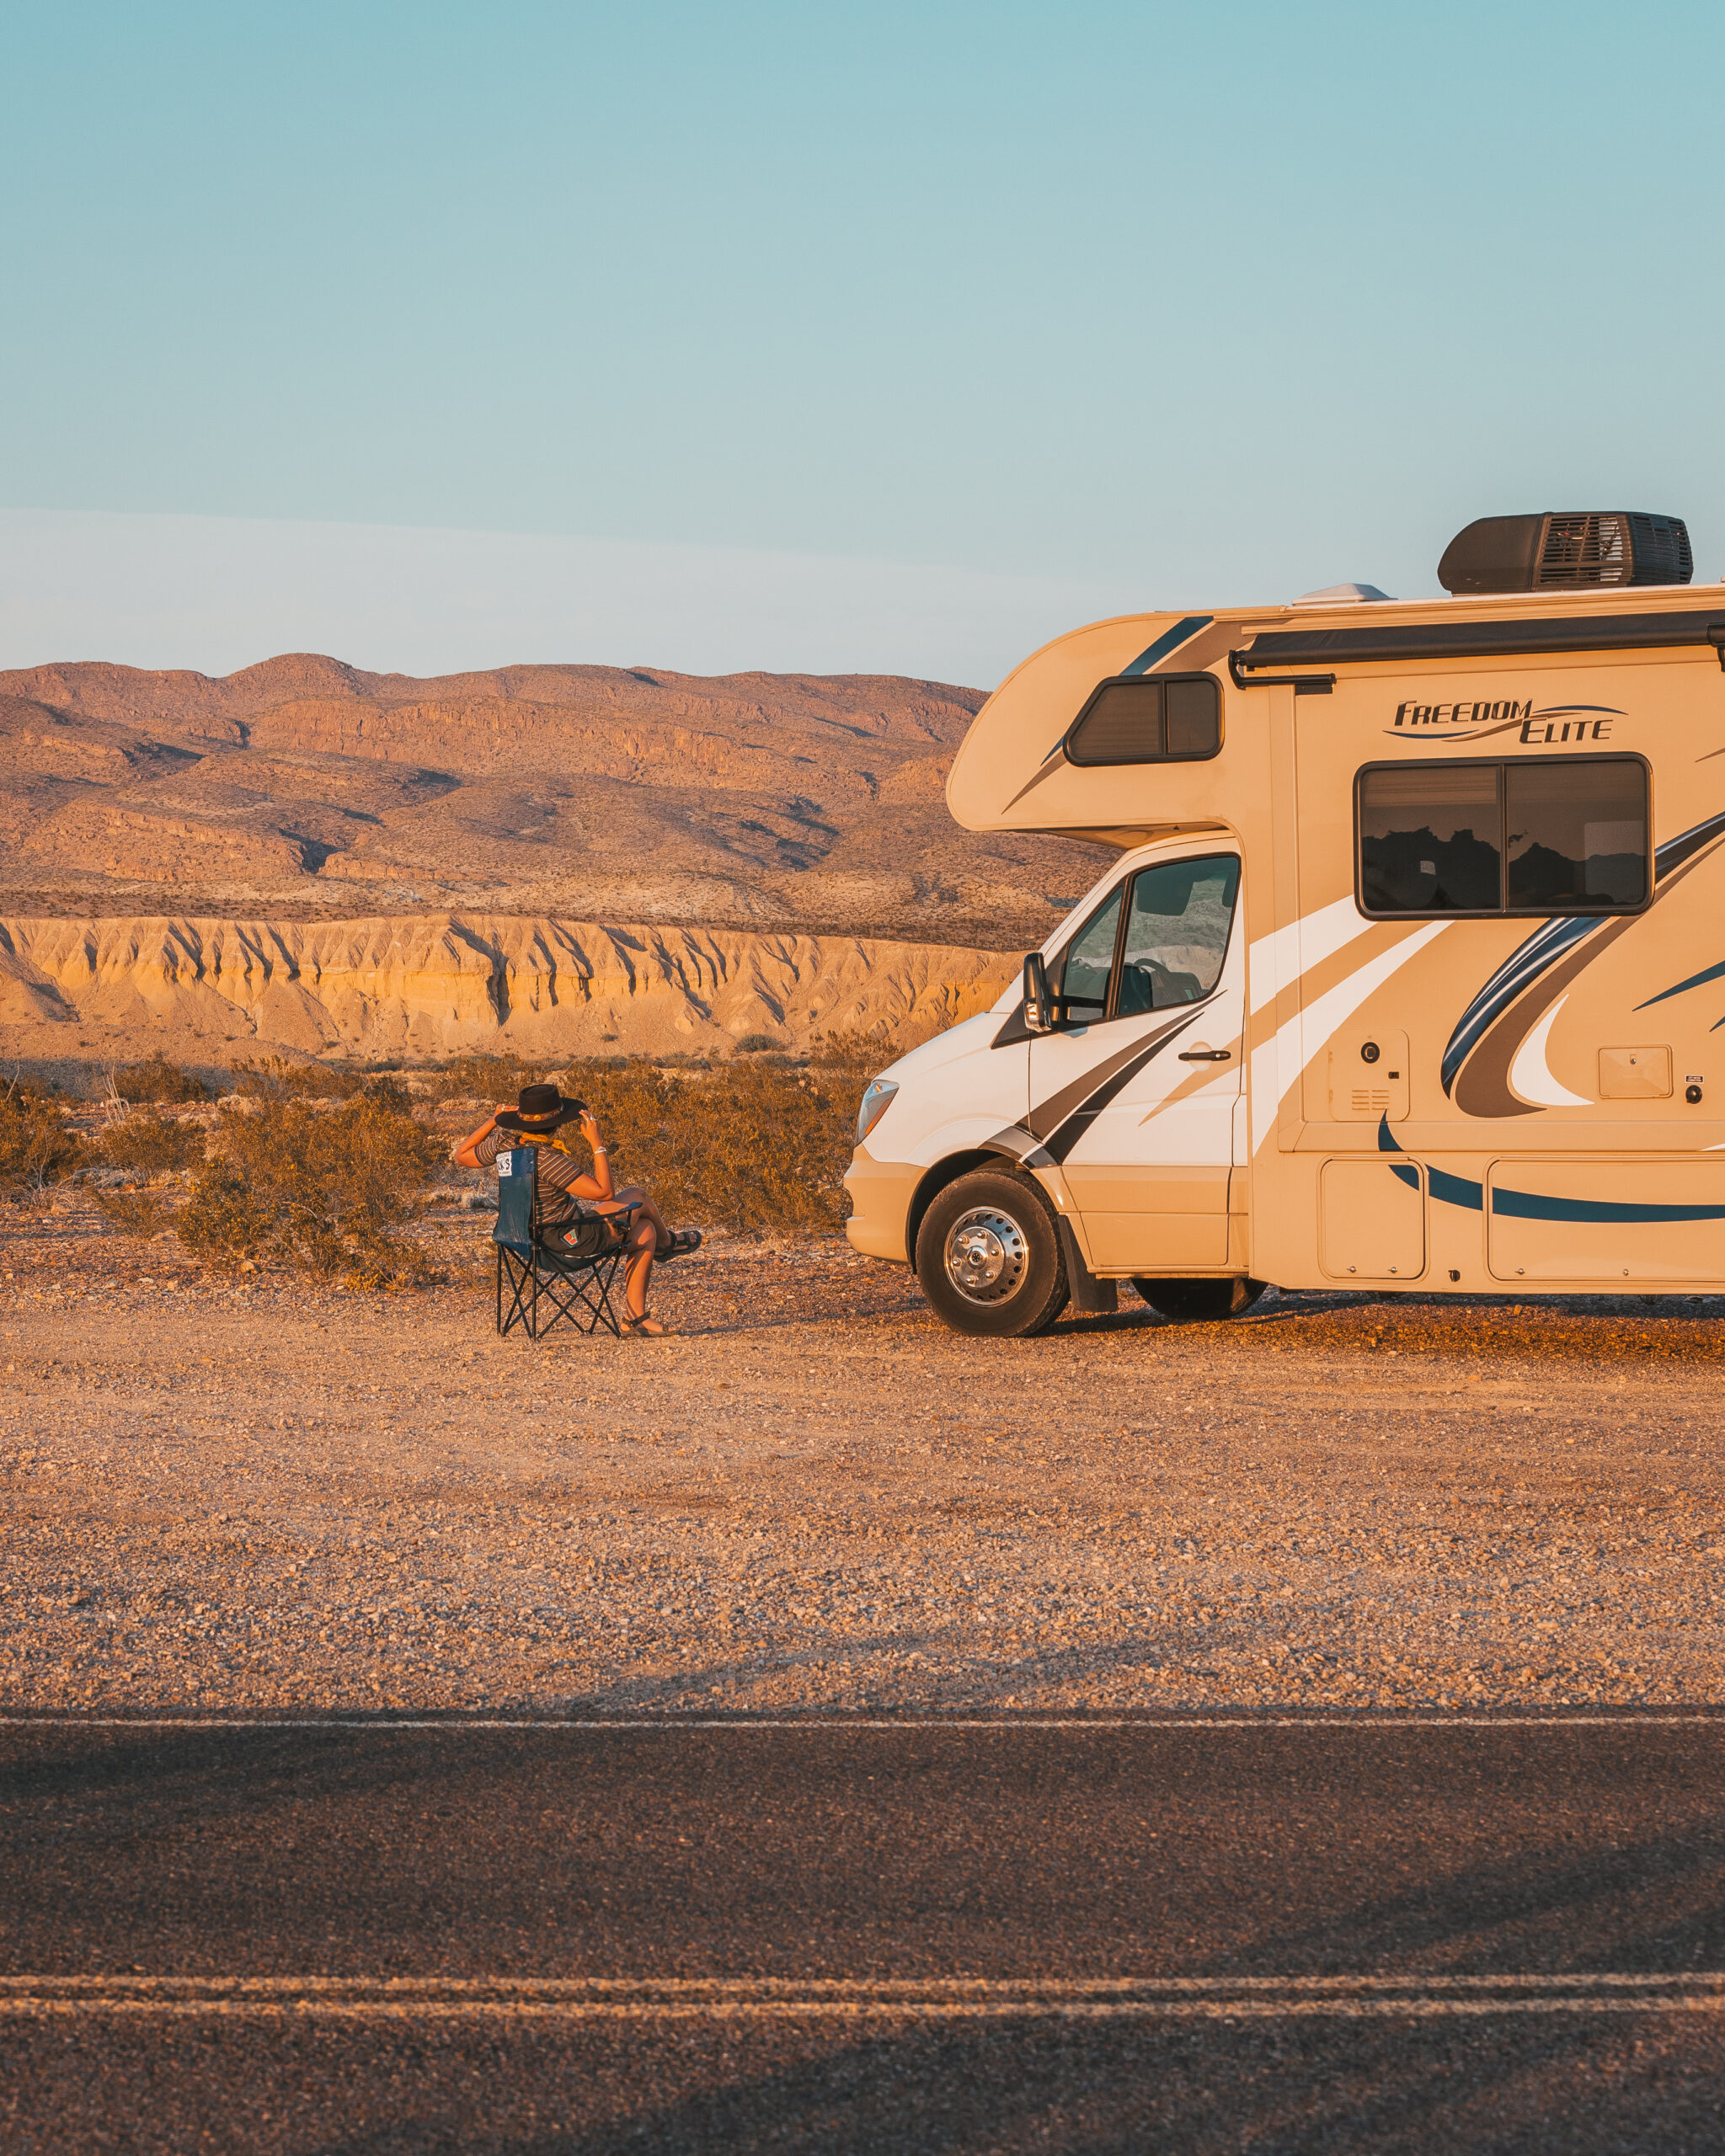 https://d3847if7zi41q5.cloudfront.net/wp-content/uploads/2015/05/13060254/Class-C-camper-parked-in-the-desert-scaled.jpeg